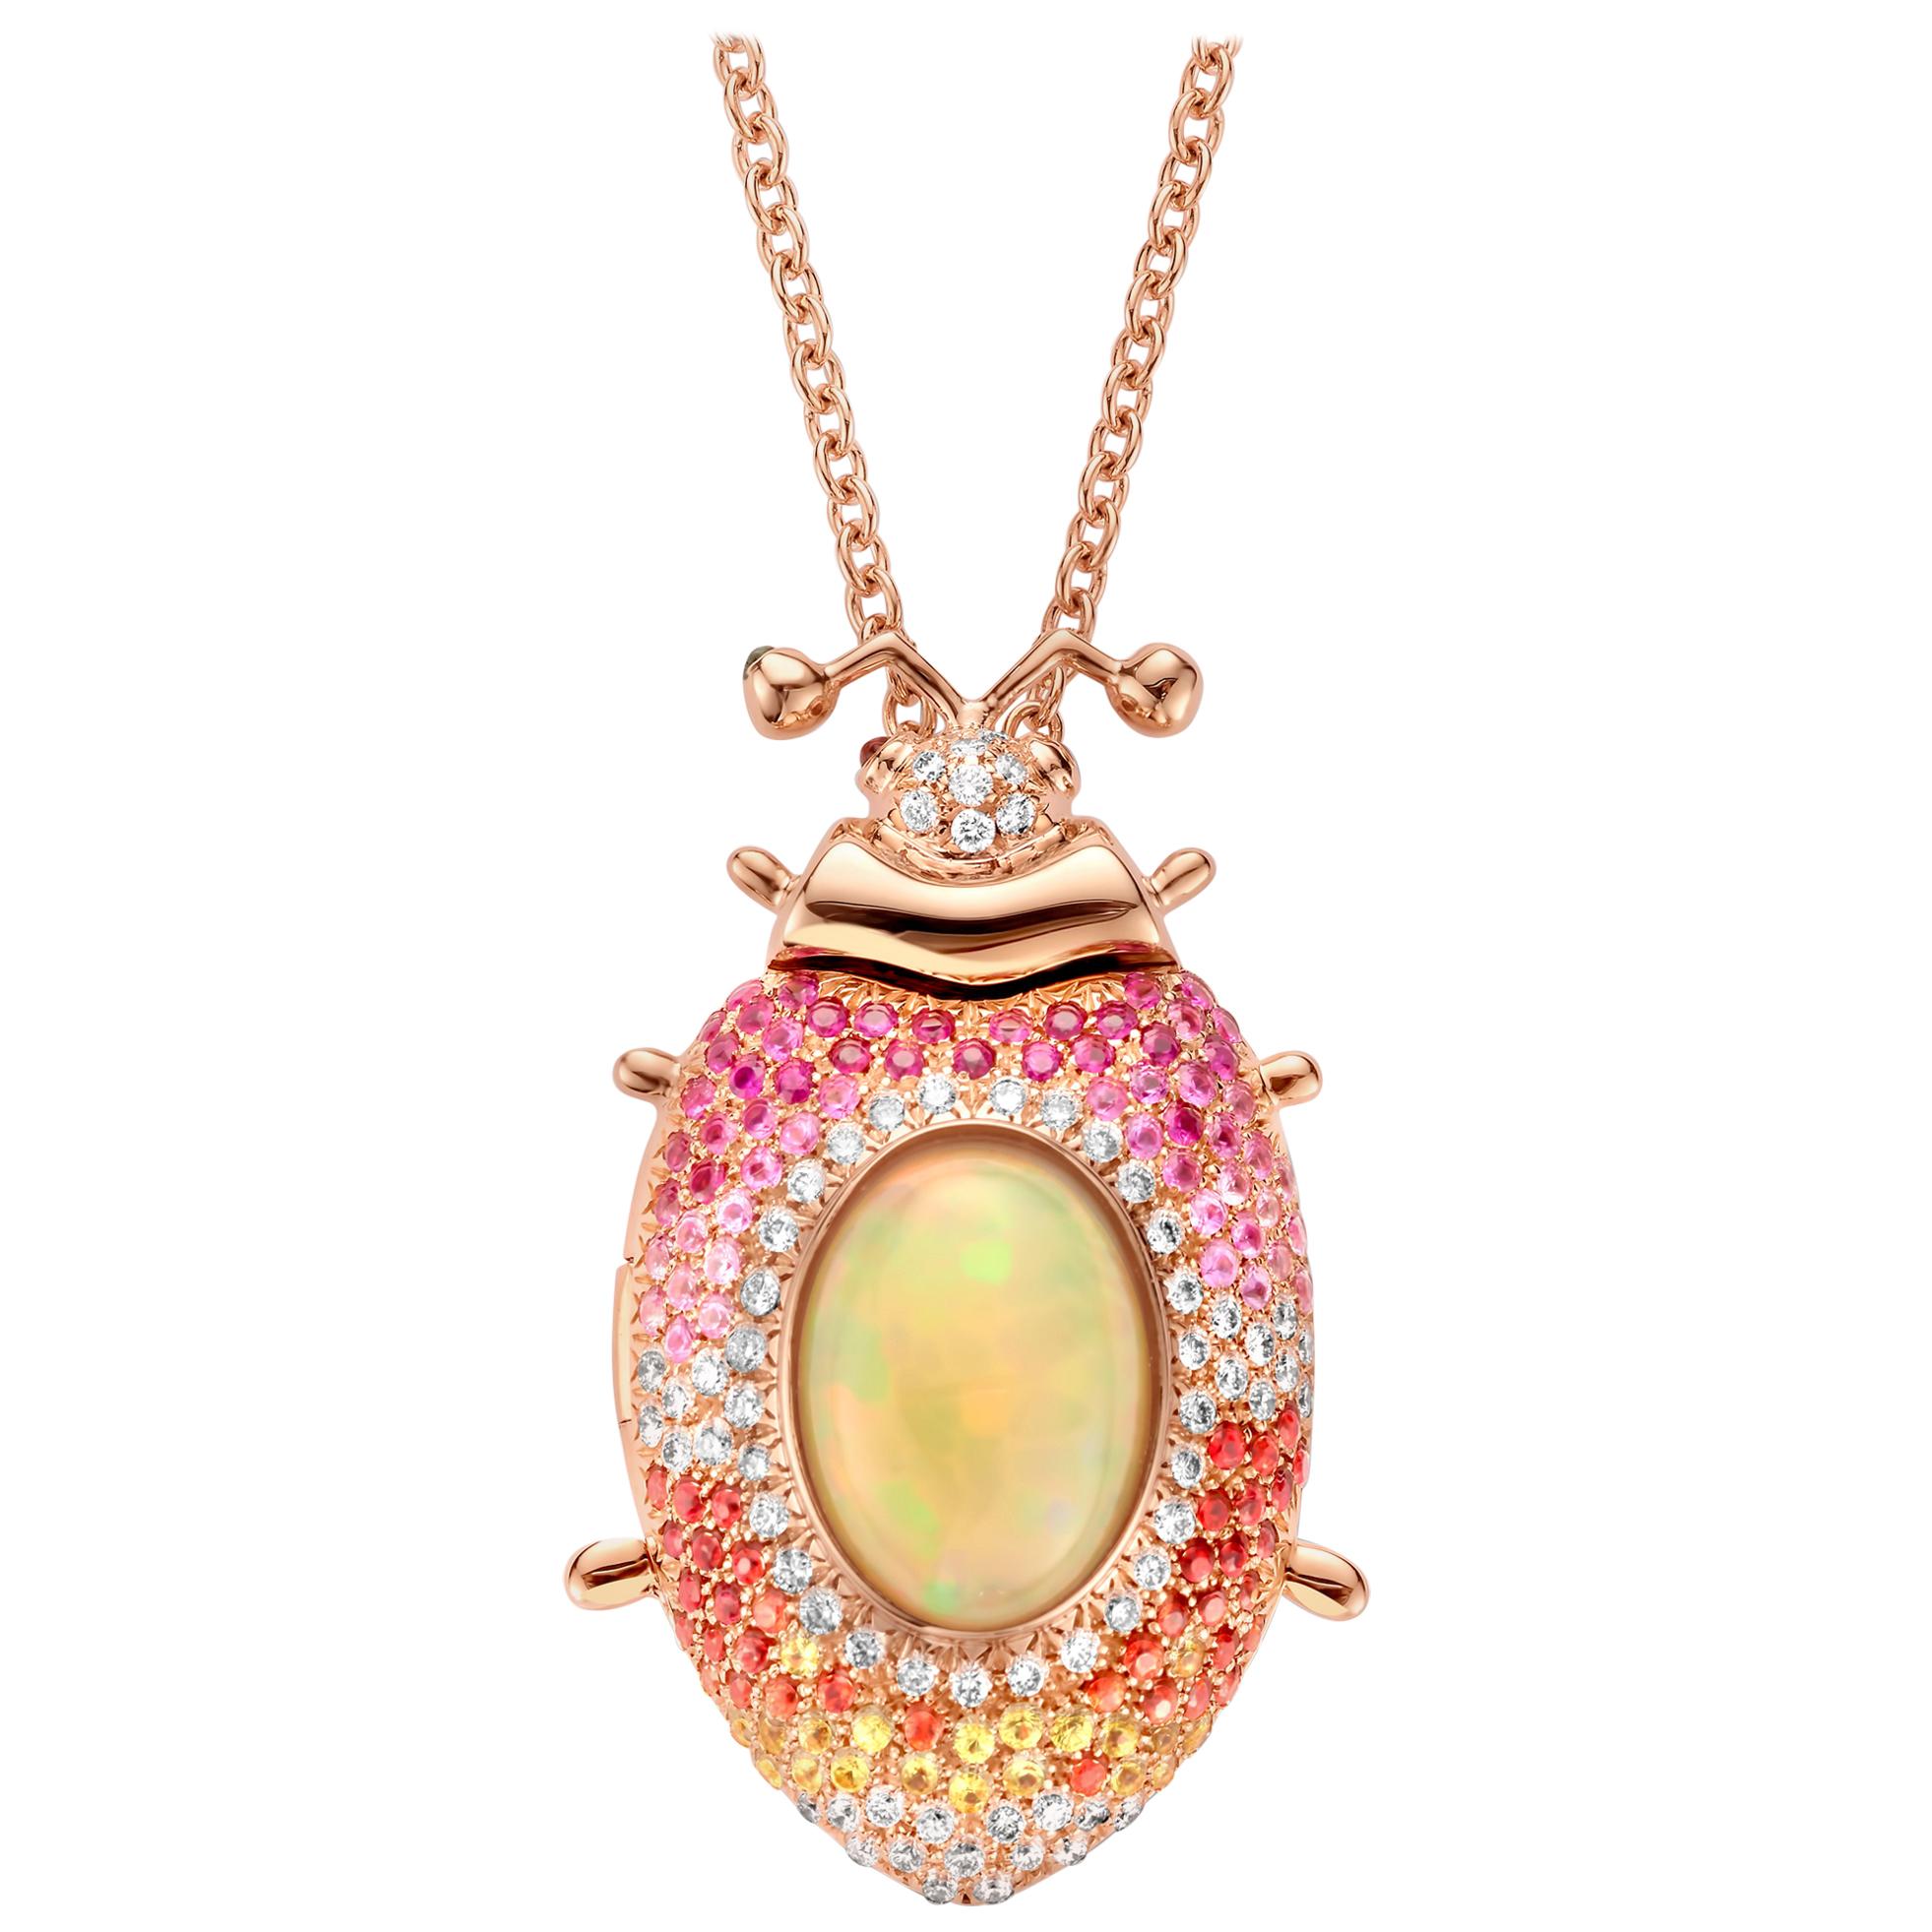 One of a kind lucky beetle necklace in 18 Karat rose gold 26,2g set with the finest diamonds in brilliant cut 0,62Ct (VVS/DEF quality) one natural, opal in oval cabochon cut 5.00Ct, pink and orange, yellow and pink sapphires in brilliant cut 1,45Ct.